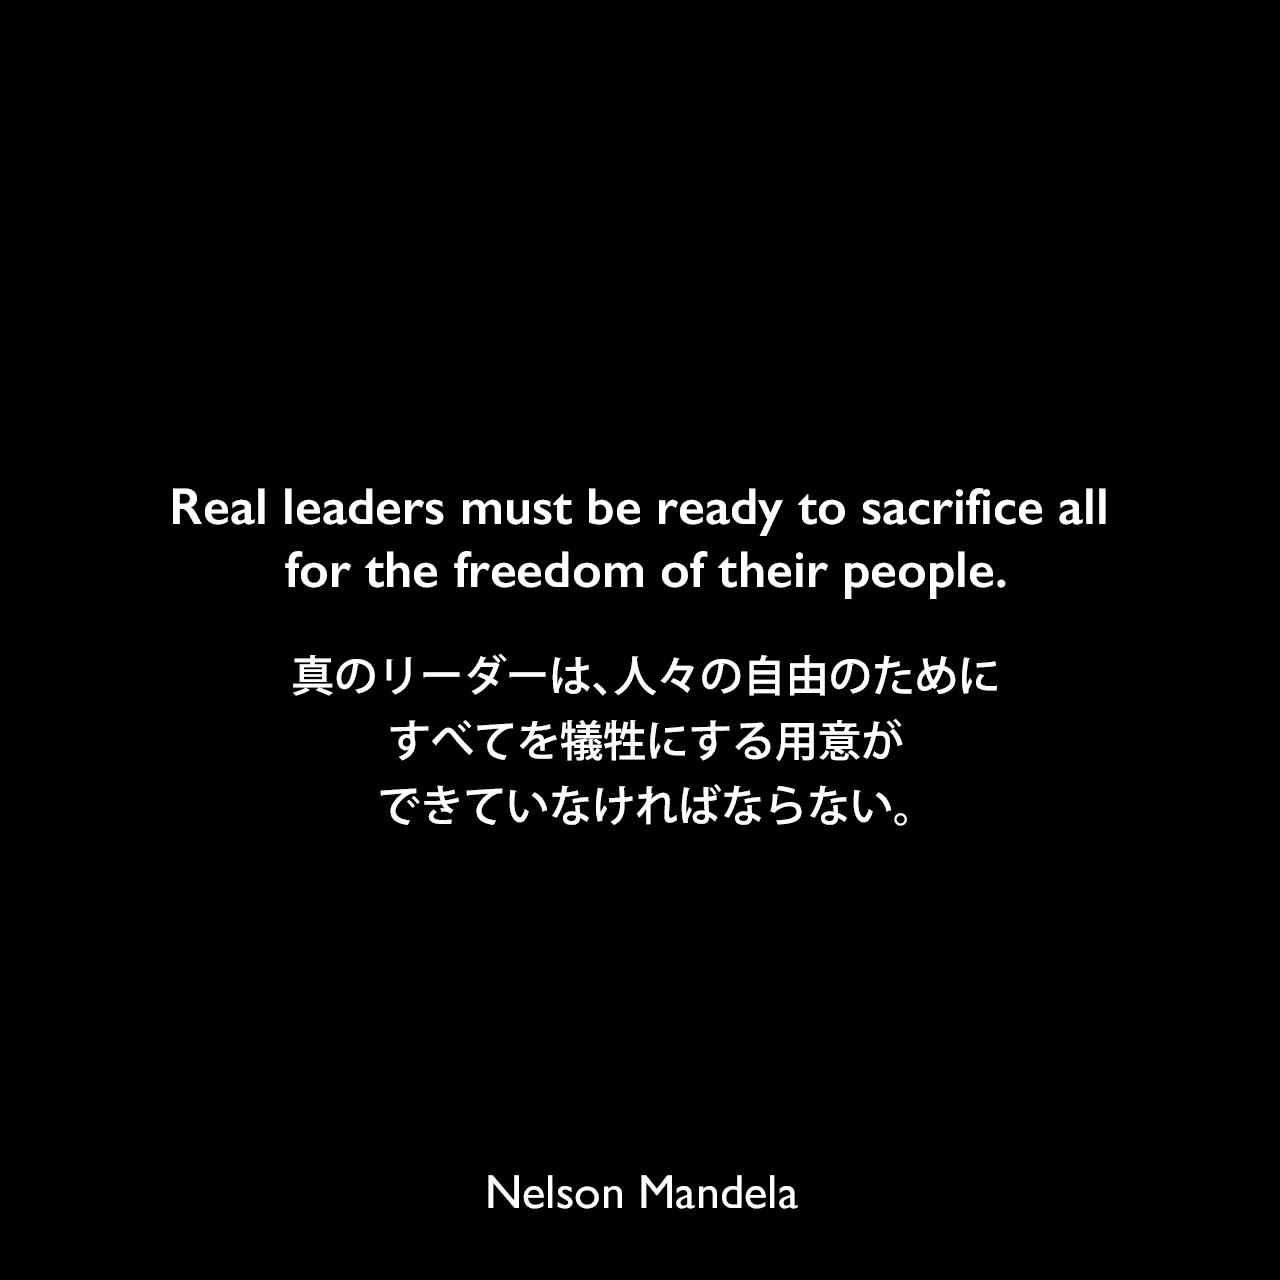 Real leaders must be ready to sacrifice all for the freedom of their people.真のリーダーは、人々の自由のためにすべてを犠牲にする用意ができていなければならない。- ネルソン・マンデラによる本「Nelson Mandela by Himself: The Authorised Book of Quotations」より